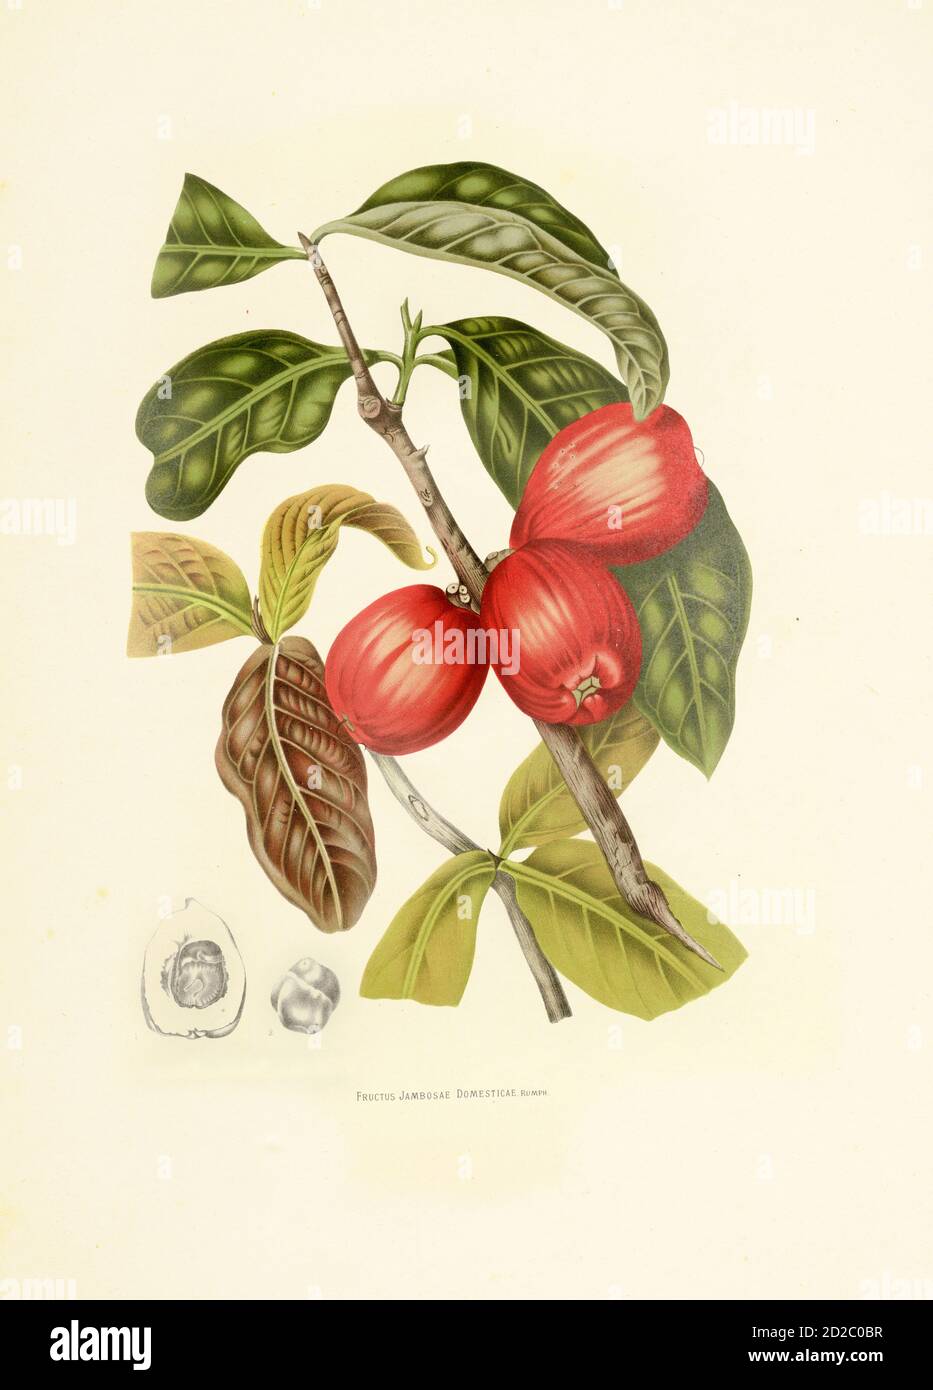 19th-century engraving of a syzygium malaccense (also known as jambosa domestica, Malay apple, Malay rose apple, otaheite cashew and pommerac). Stock Photo